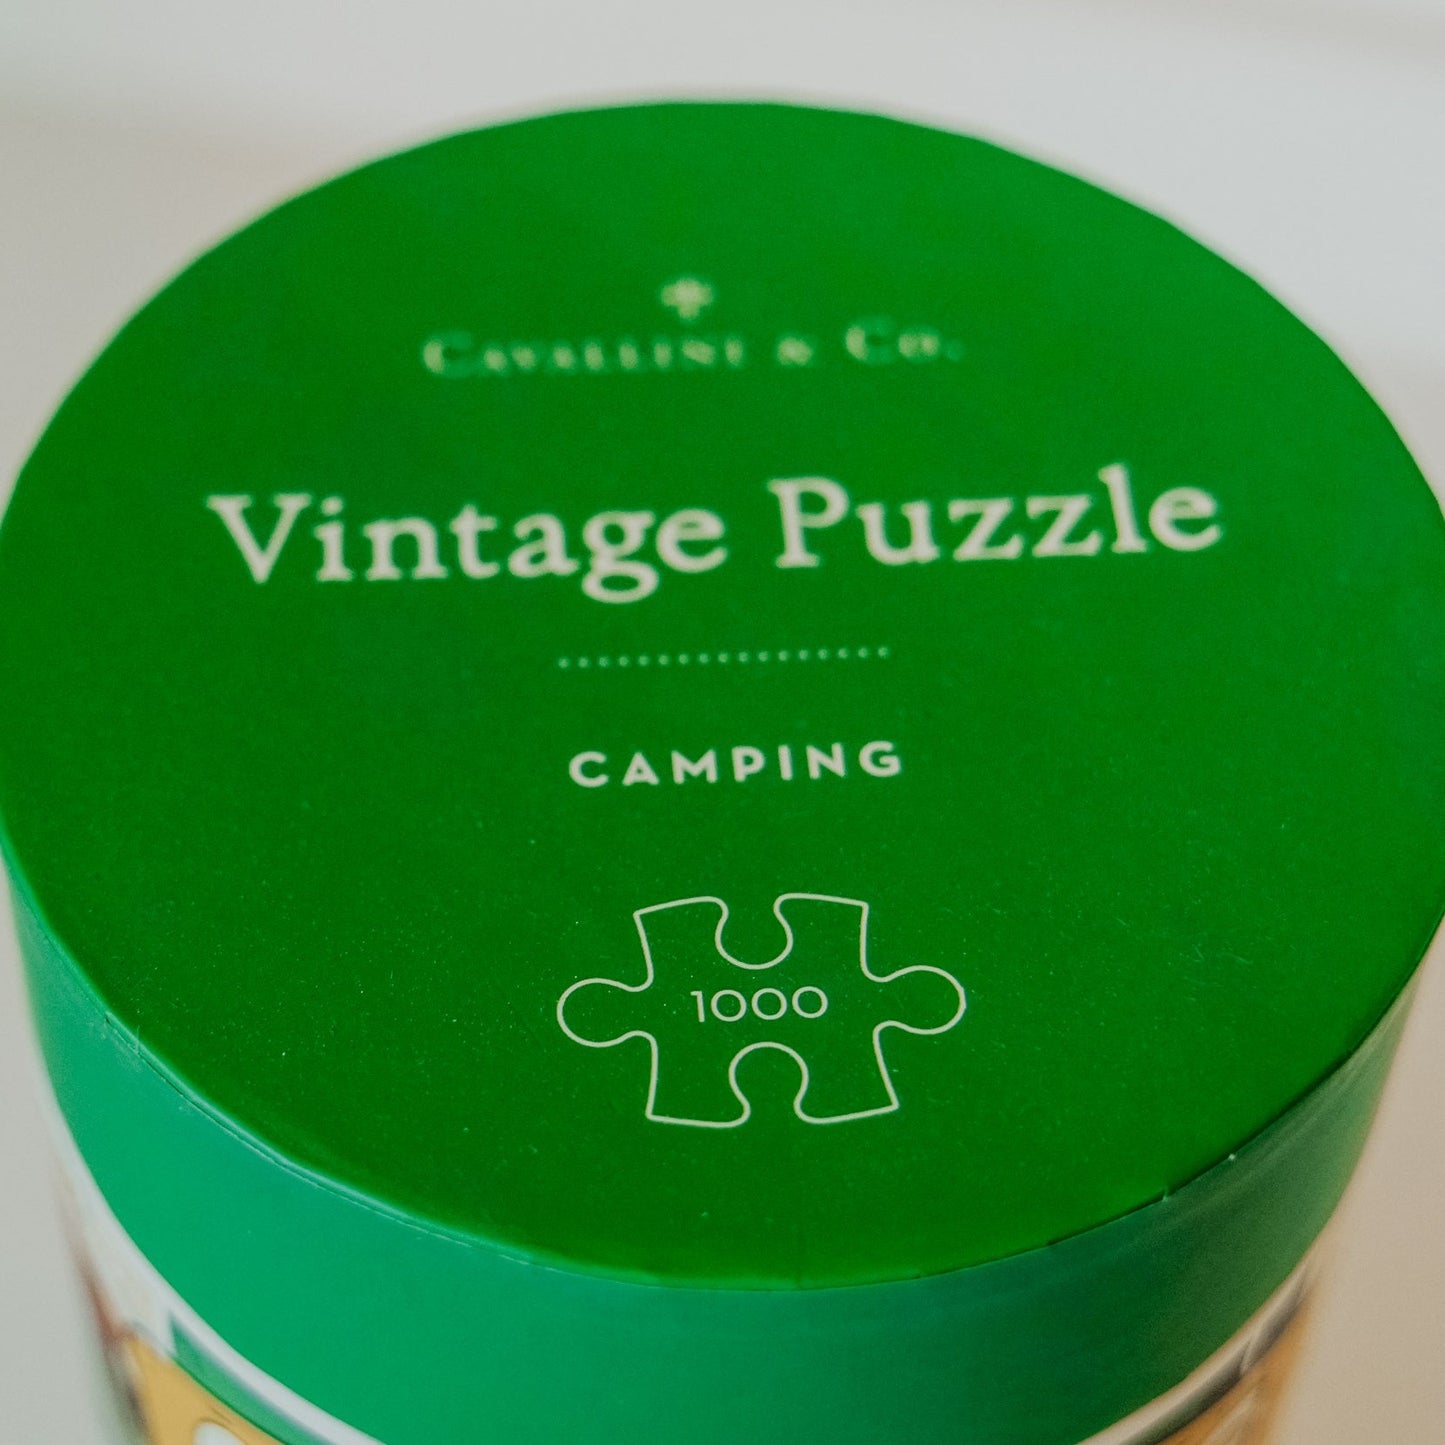 Camping Puzzle